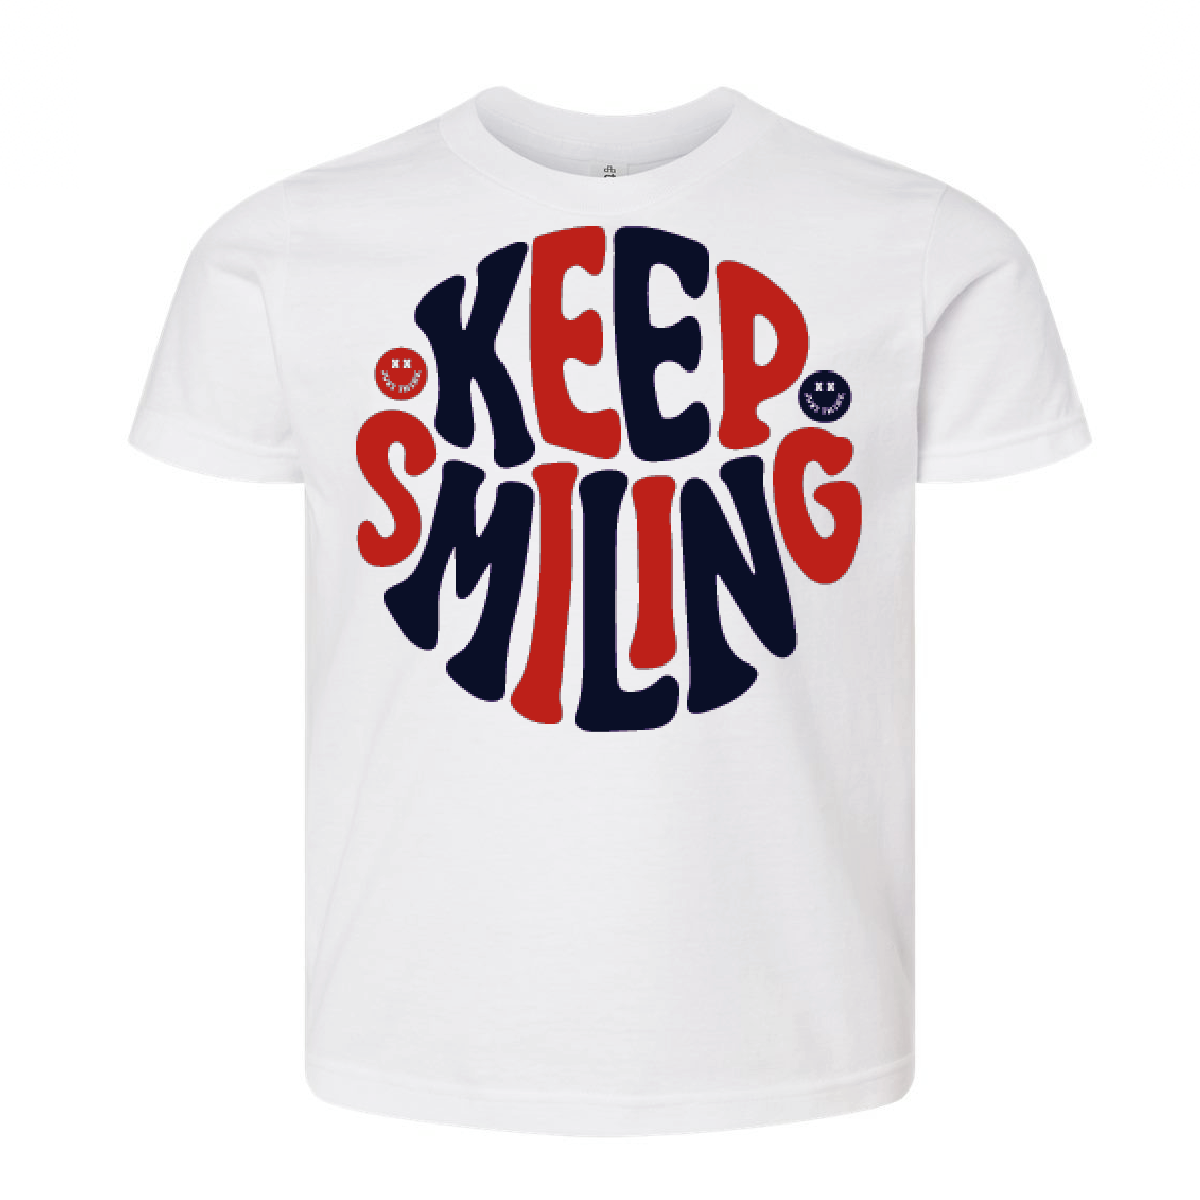 Keep Smiling Red White and Blue - Kids Tee